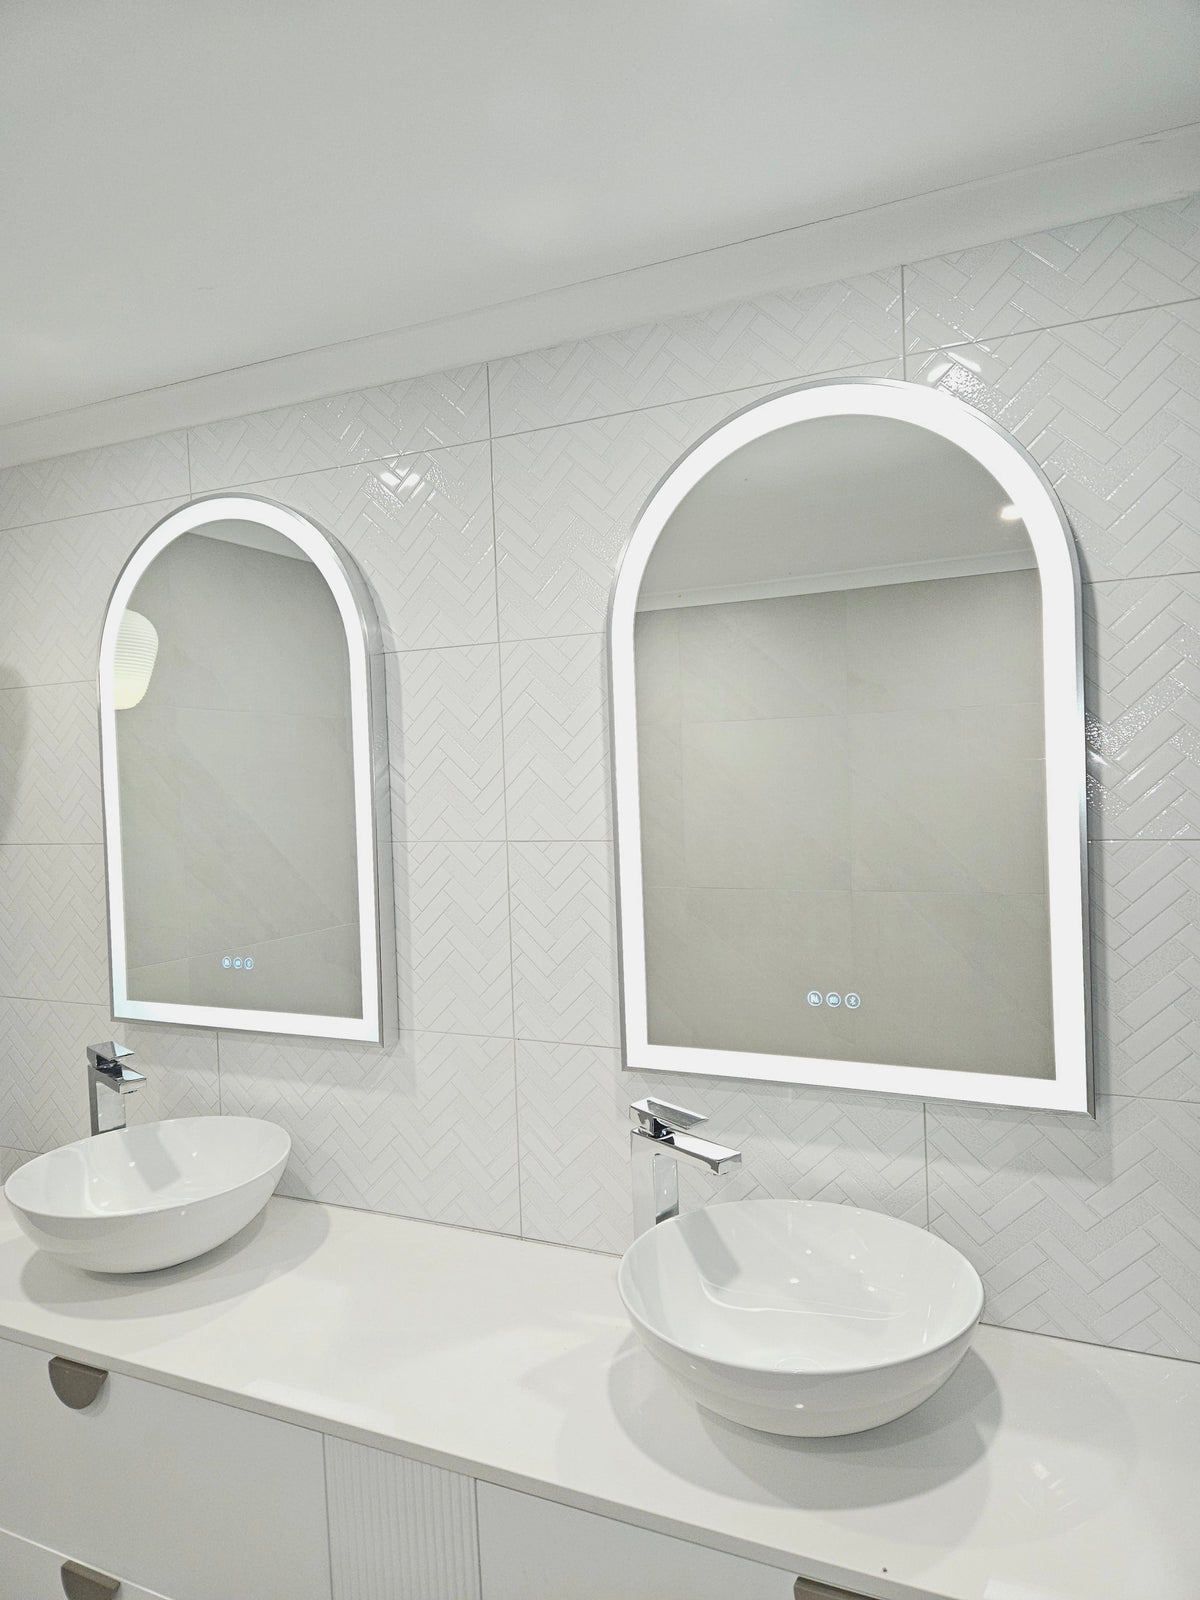 Bird's-eye Perspective of Two Arch-Shaped Smart LED Mirrors in bright all-white bathroom